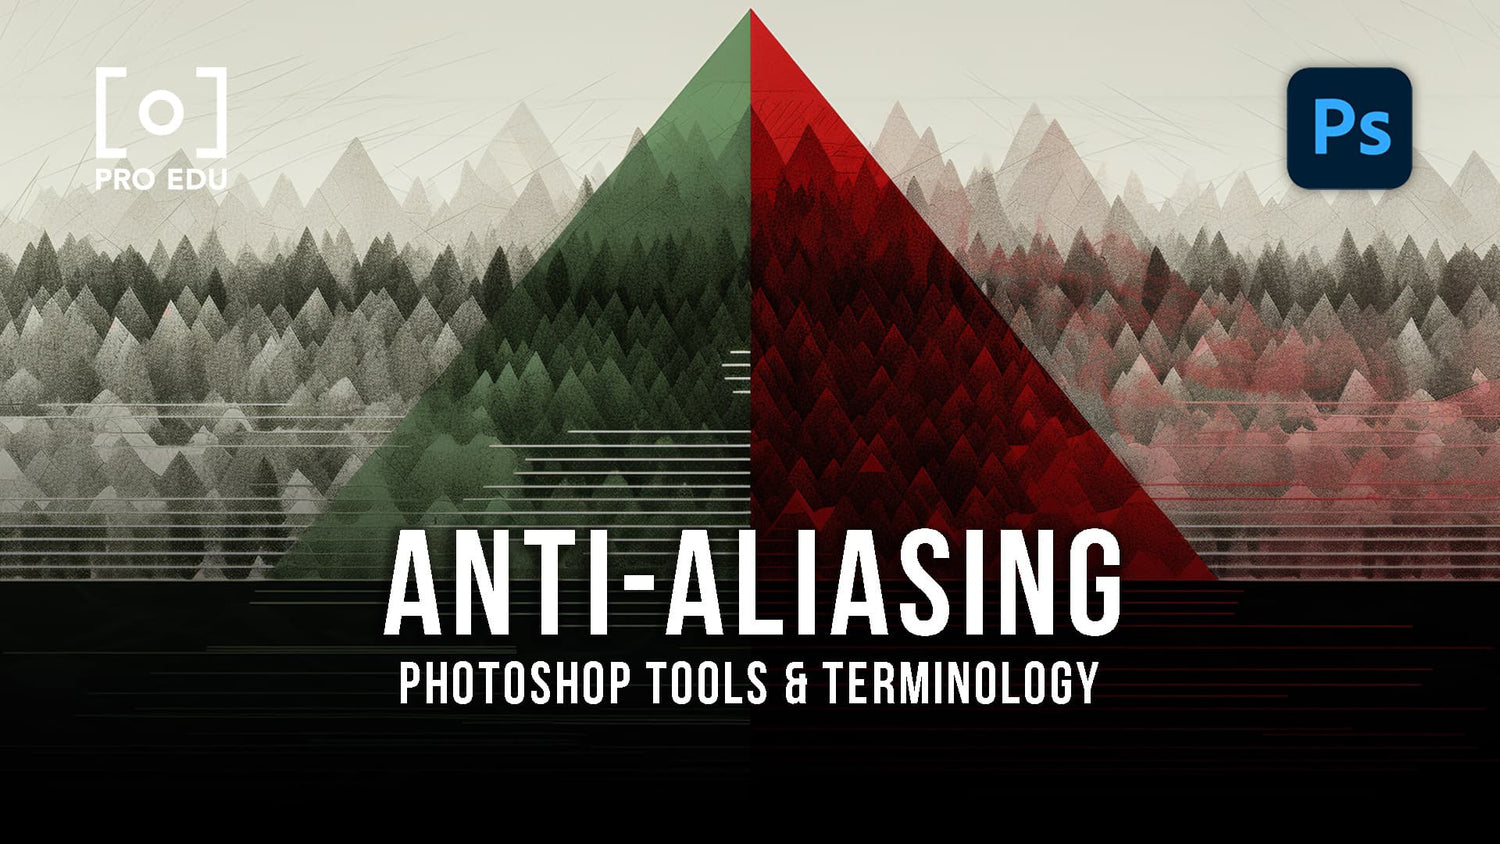 An example of anti aliasing in photoshop and how it works pro edu guide for photographers